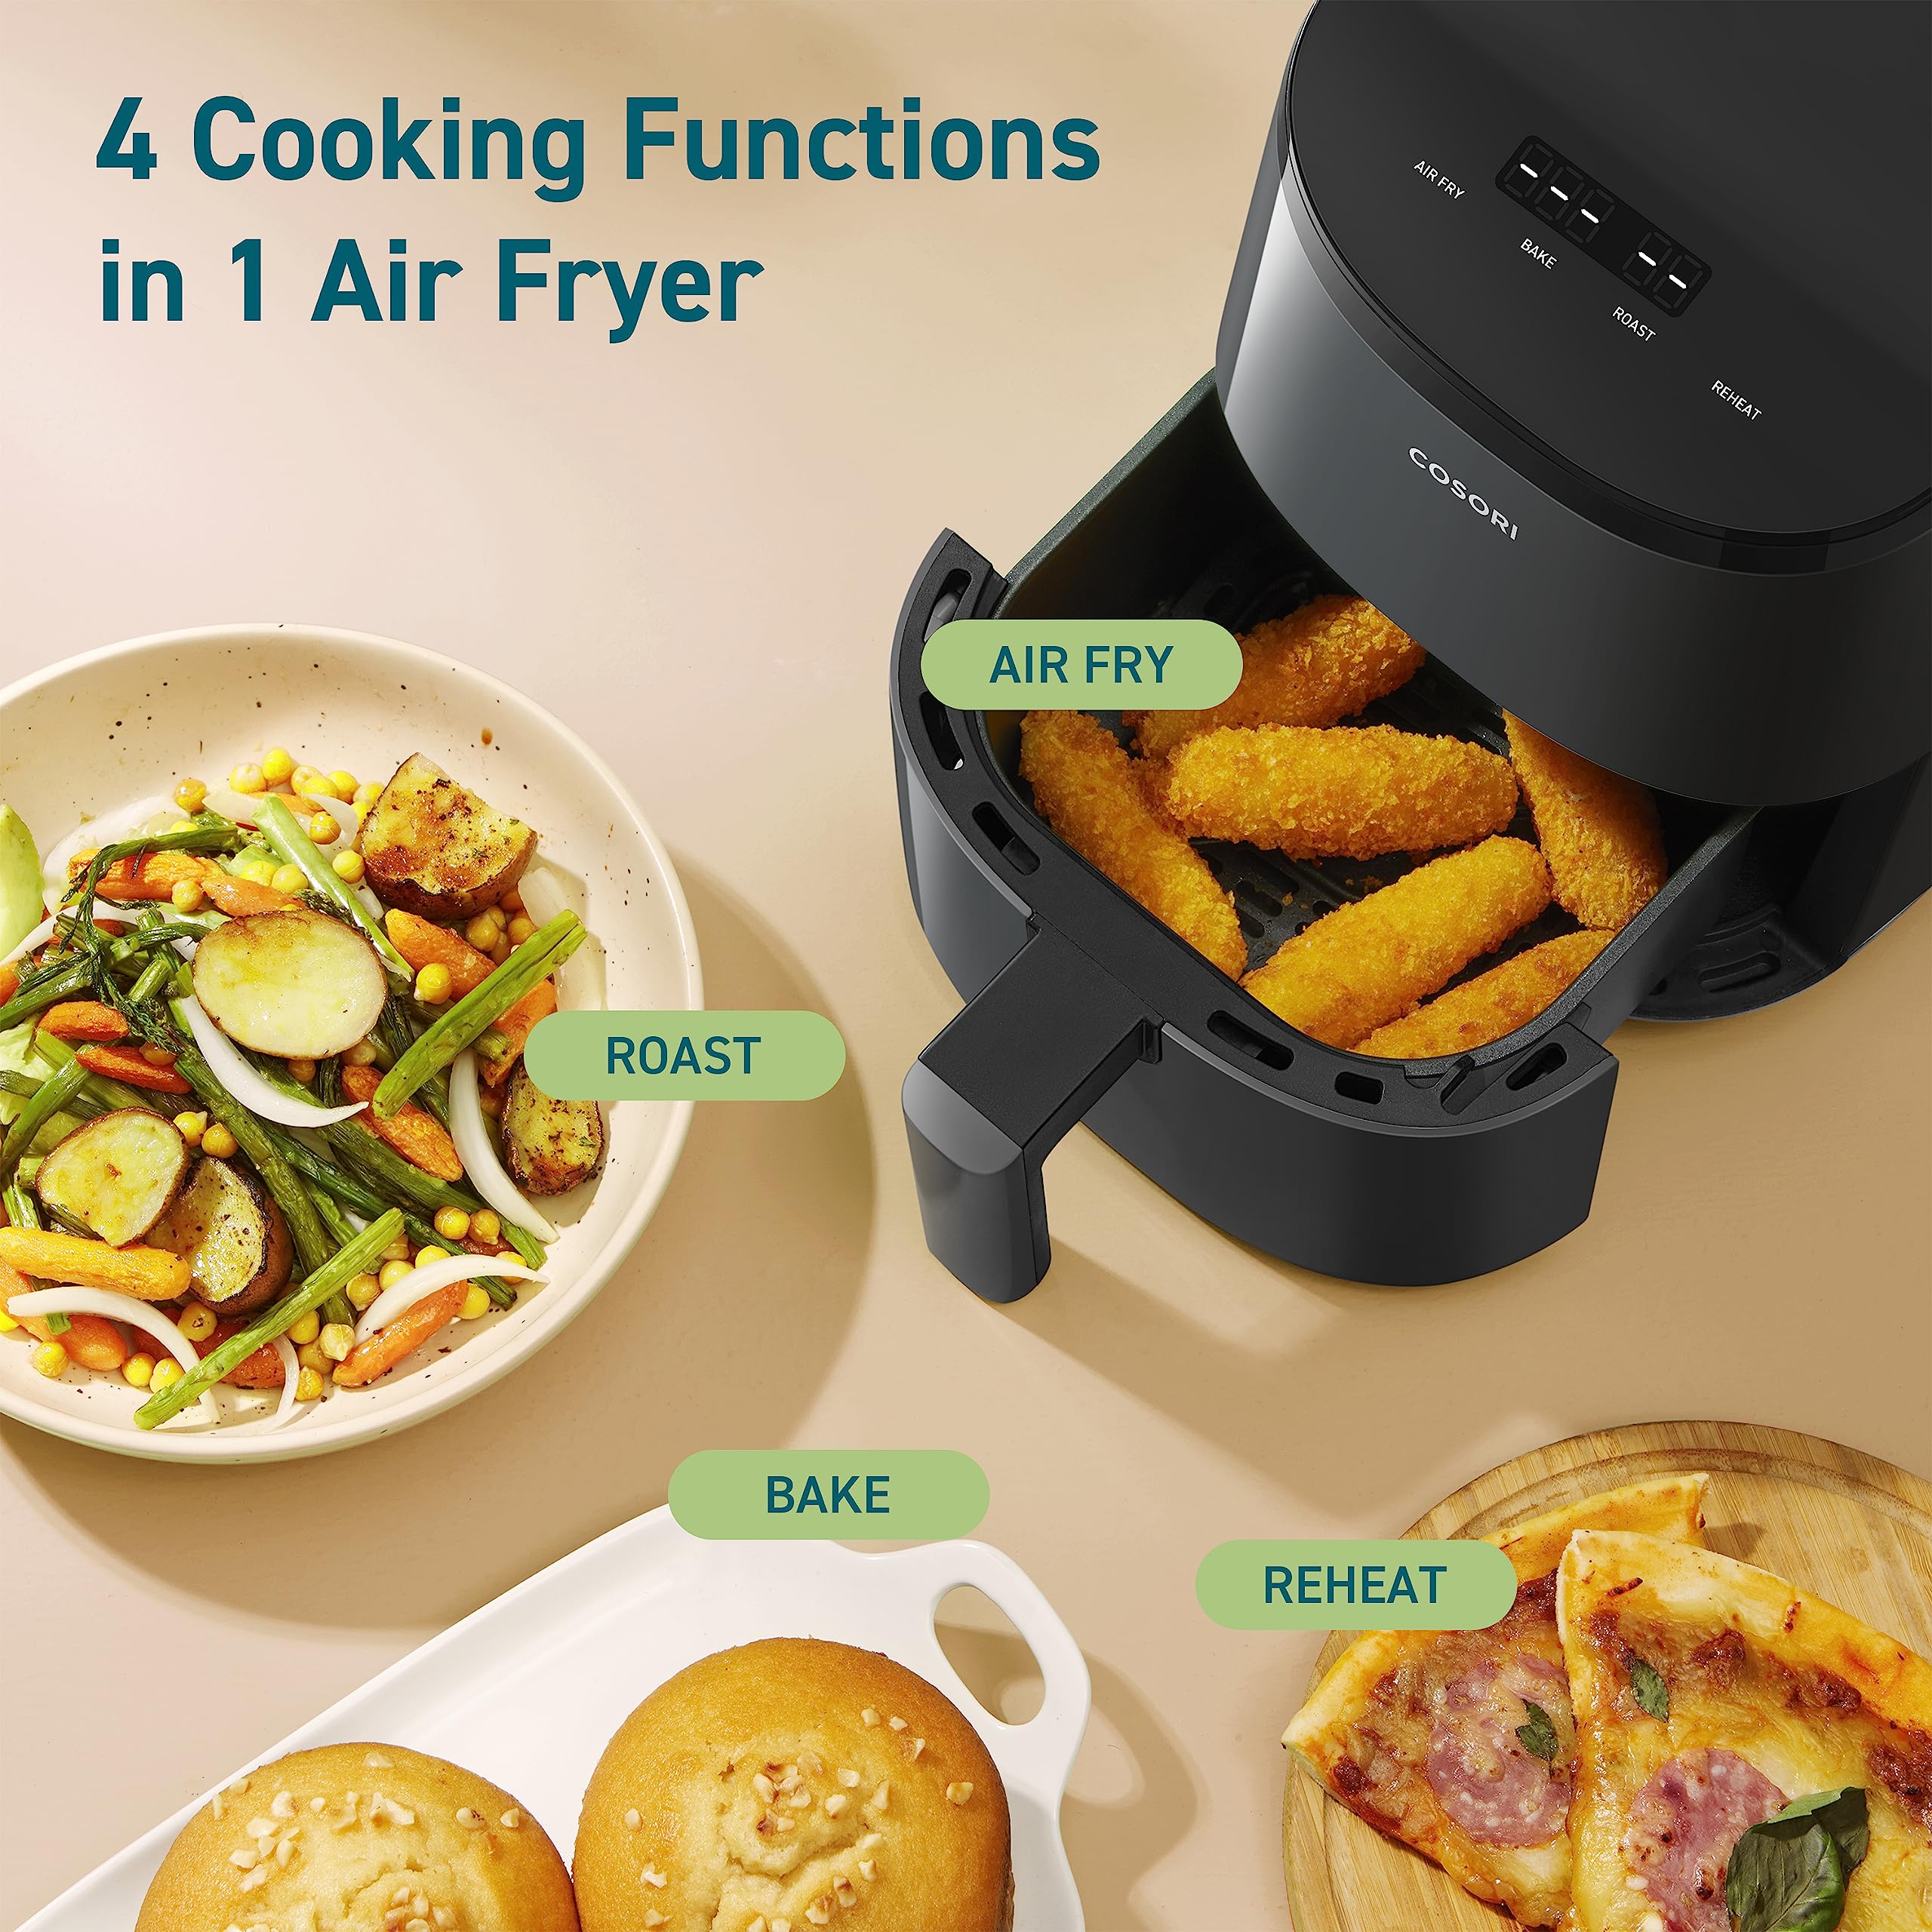 COSORI Small Air Fryer Oven 2.1 Qt, 4-in-1 Mini Airfryer, Bake, Roast, Reheat, Space-saving & Low-noise, Nonstick and Dishwasher Safe Basket, 30 In-App Recipes, Sticker with 6 Reference Guides, Gray